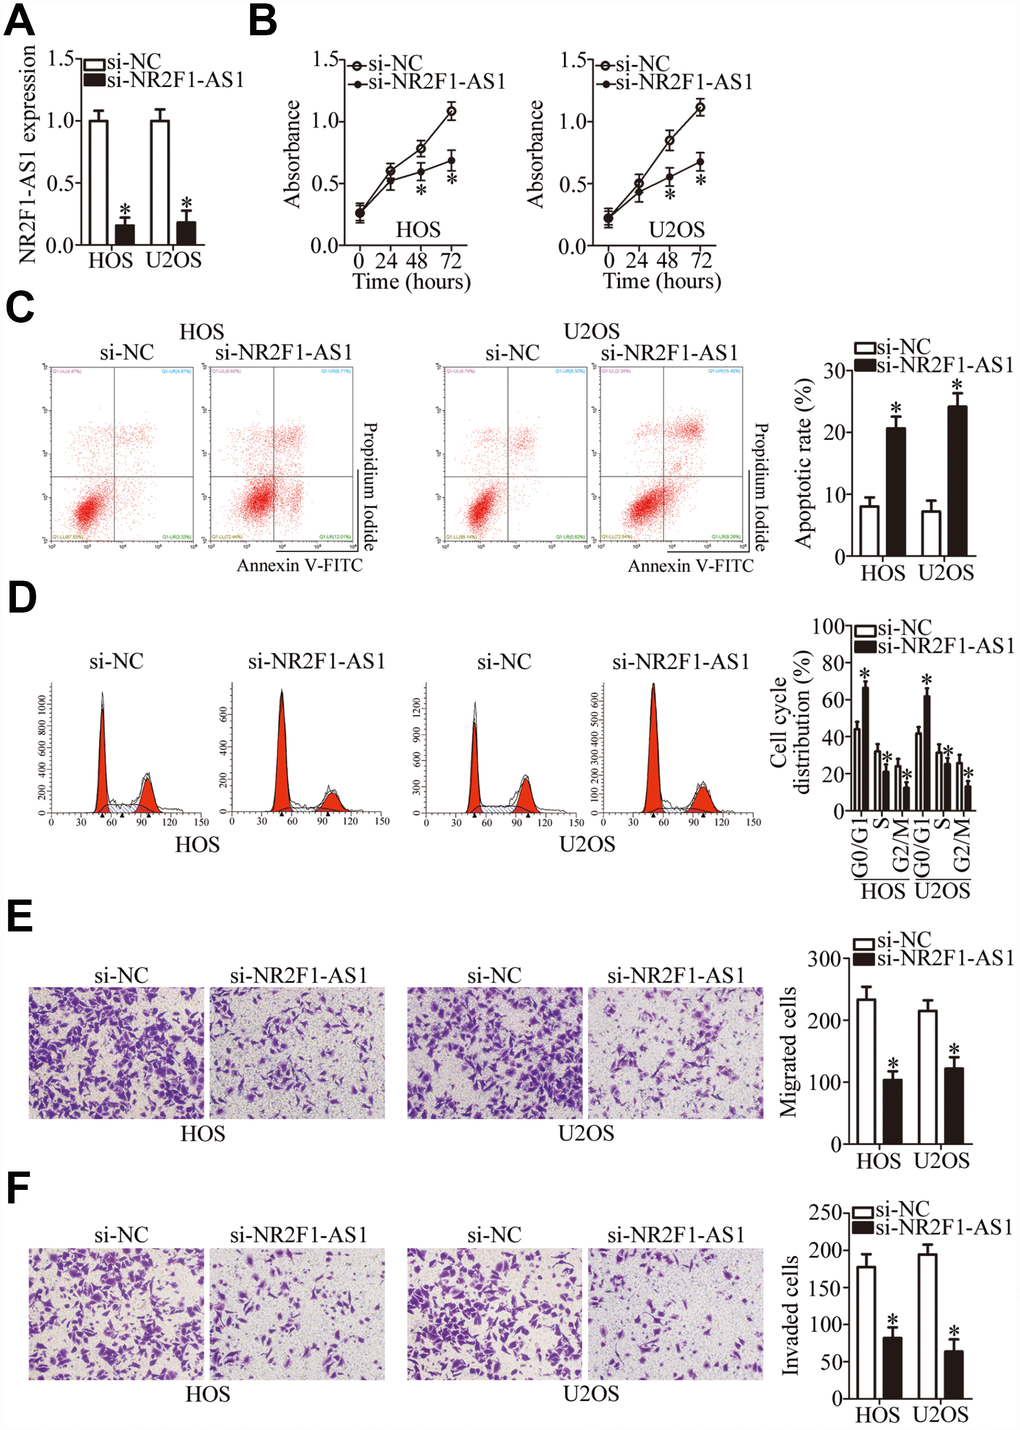 NR2F1-AS1 silencing inhibits the proliferation, migration, and invasiveness and promotes the apoptosis of HOS and U2OS cells. (A) Either si-NR2F1-AS1 or si-NC was transfected into HOS and U2OS cells. At 48 h after transfection, RT-qPCR analysis was performed to assess the transfection efficiency. *P B) The CCK-8 assay result showing cell proliferation status under the influence of the NR2F1-AS1 knockdown in HOS and U2OS cells. *P C) The apoptotic rate of HOS and U2OS cells after transfection with either si-NR2F1-AS1 or si-NC was detected by means of an Annexin V–FITC Apoptosis Detection Kit. *P D) Flow cytometry was carried out to examine the cell cycle status of HOS and U2OS cells after transfection with either si-NR2F1-AS1 or si-NC. *P E, F) Transwell migration and invasion assays quantified the migratory and invasive abilities of HOS and U2OS cells after the transfection of either si-NR2F1-AS1 or si-NC. *P 